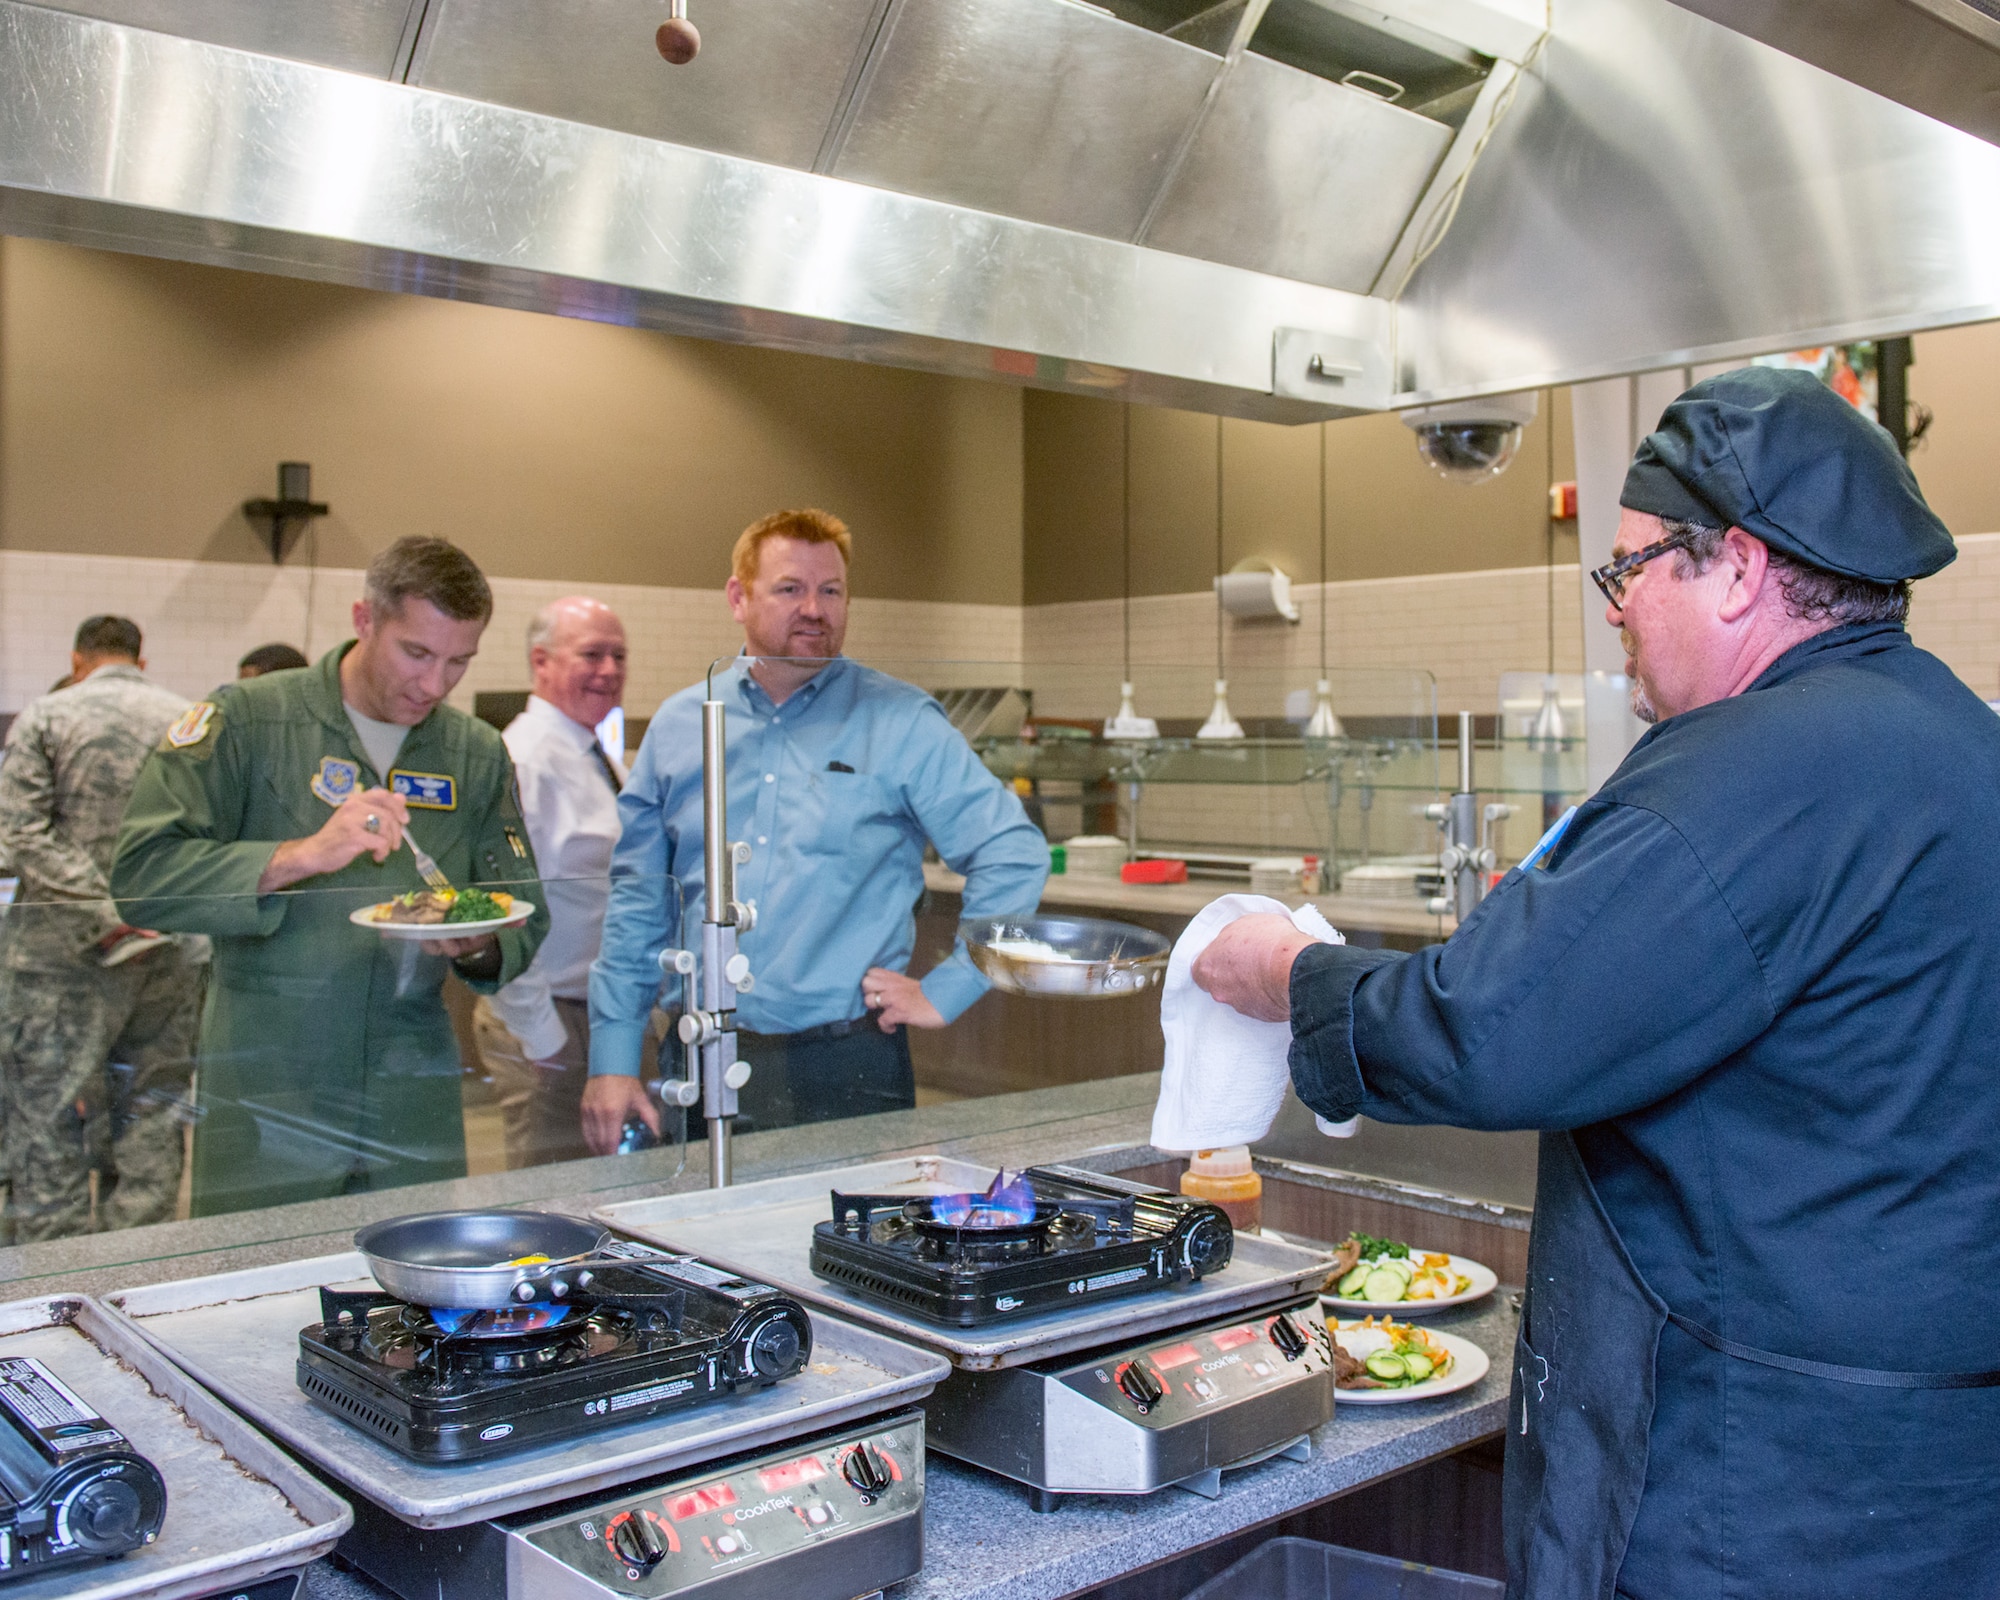 Maynard Oestreich, executive chef for Aramark prepares meals during the BIBIM Box tasting featuring Korean food at Sierra Inn Dining Facility, Travis Air Force Base, Calif., June 29, 2017. Oestreich a former U.S. Navy veteran and an award-winning chef from Napa Valley, Calif., took the head chef position so he could mentor young Airmen. (U.S. Air Force photo by Louis Briscese)